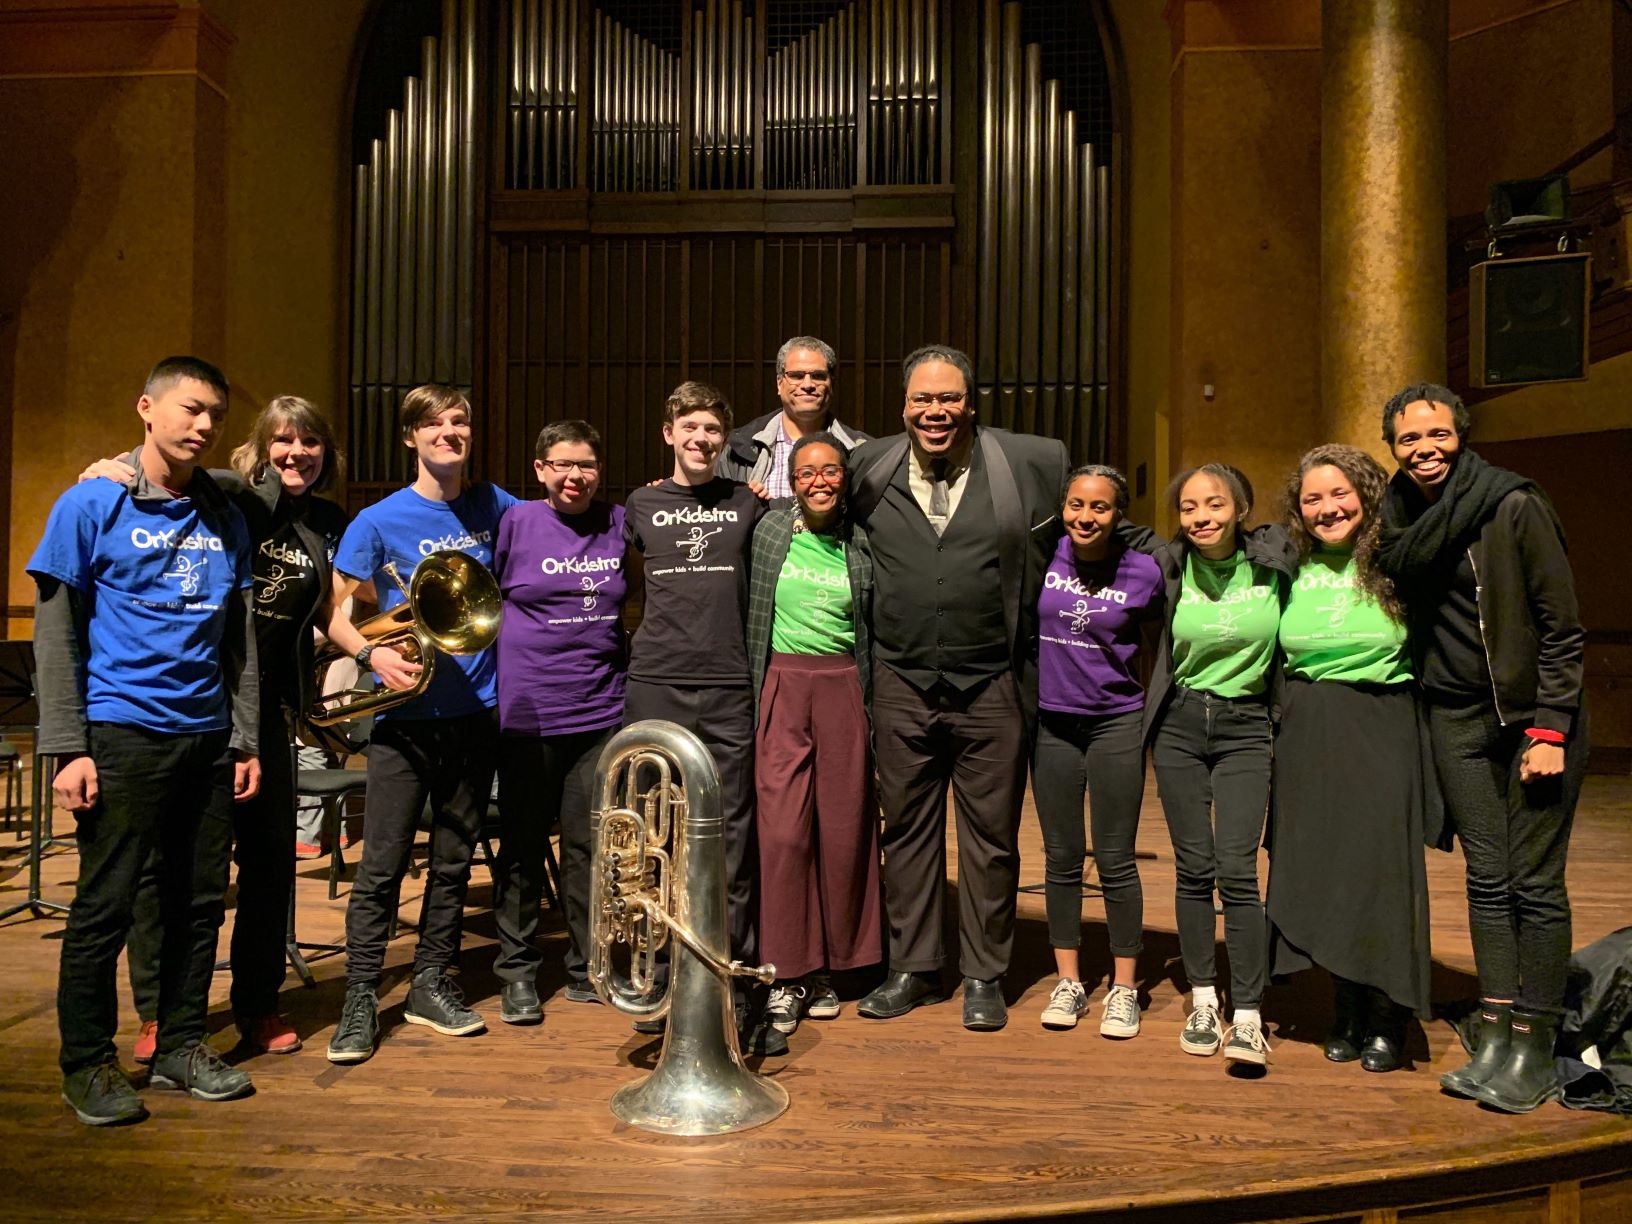 A photo of Dr. Richard A. White with OrKidstra